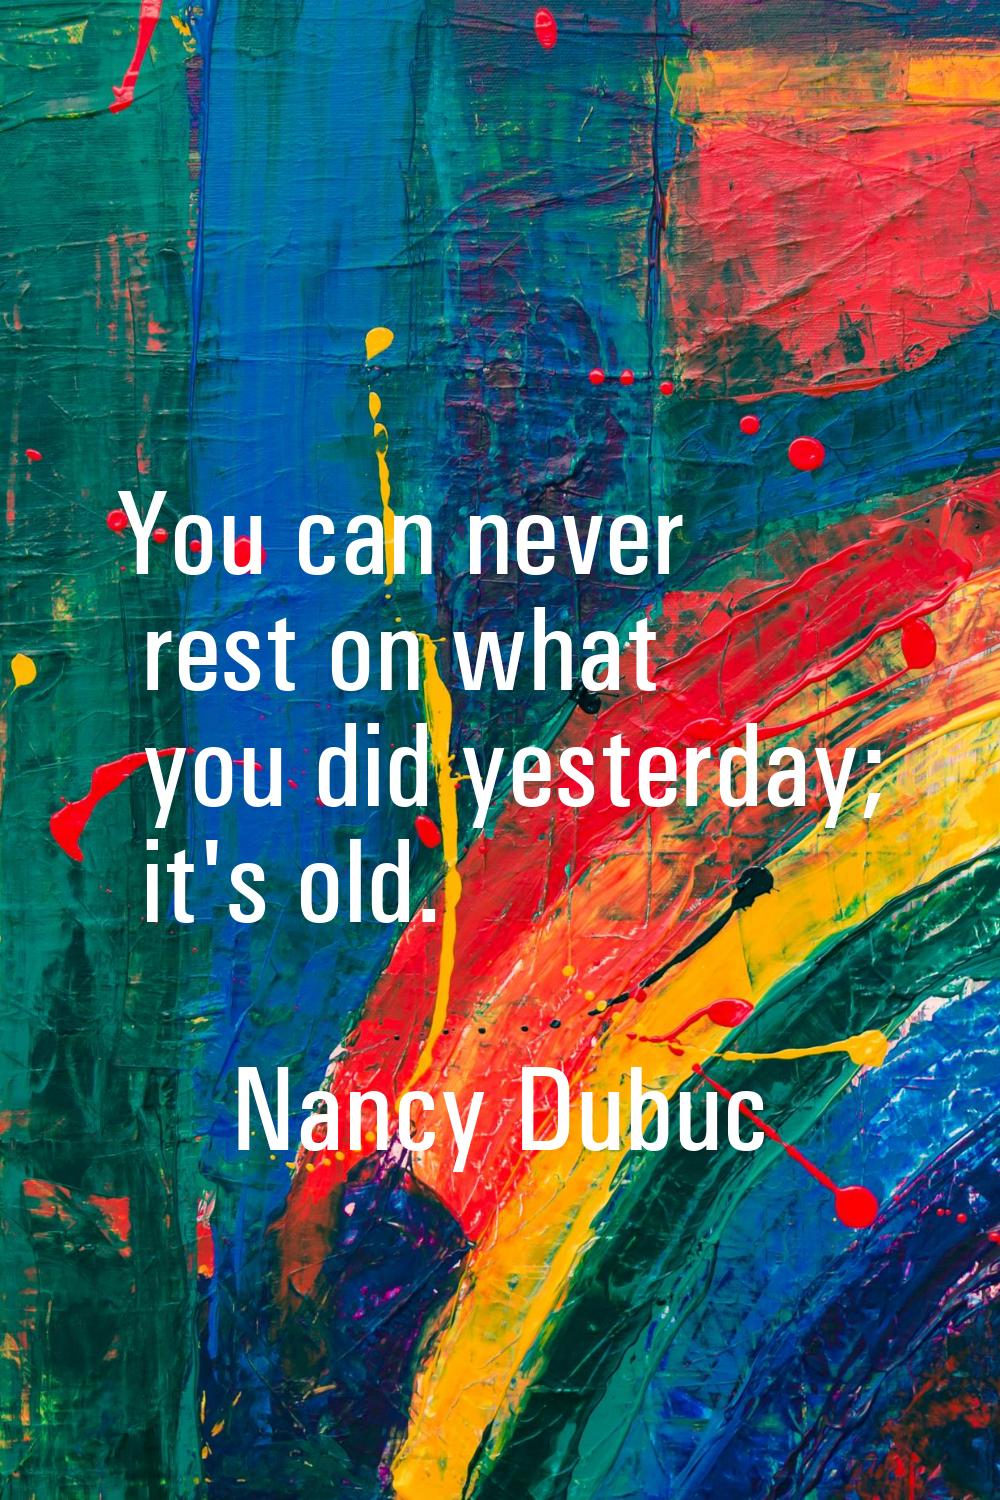 You can never rest on what you did yesterday; it's old.